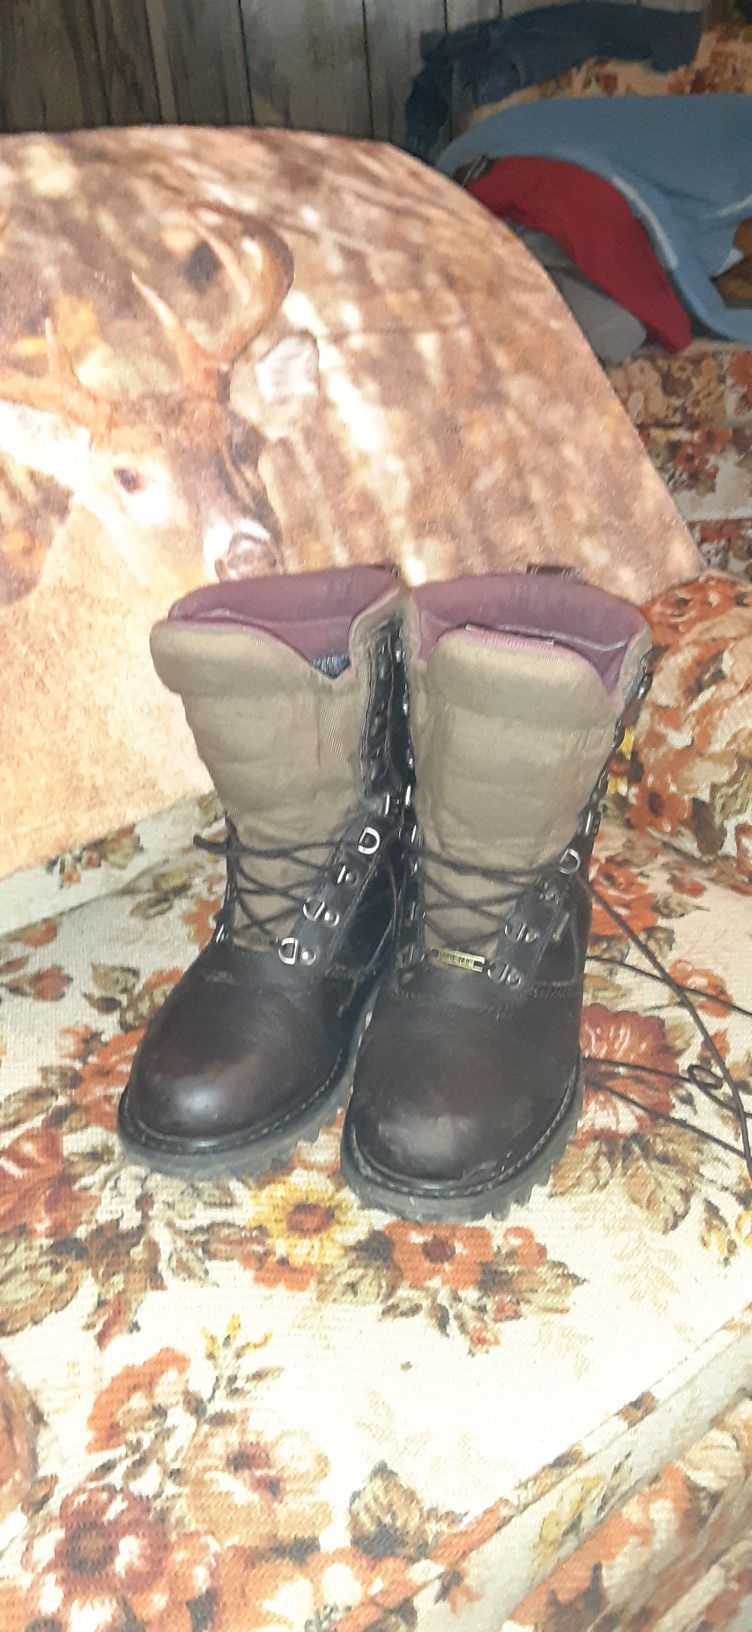 Cabelas 10 inch hunting boots size 9.5